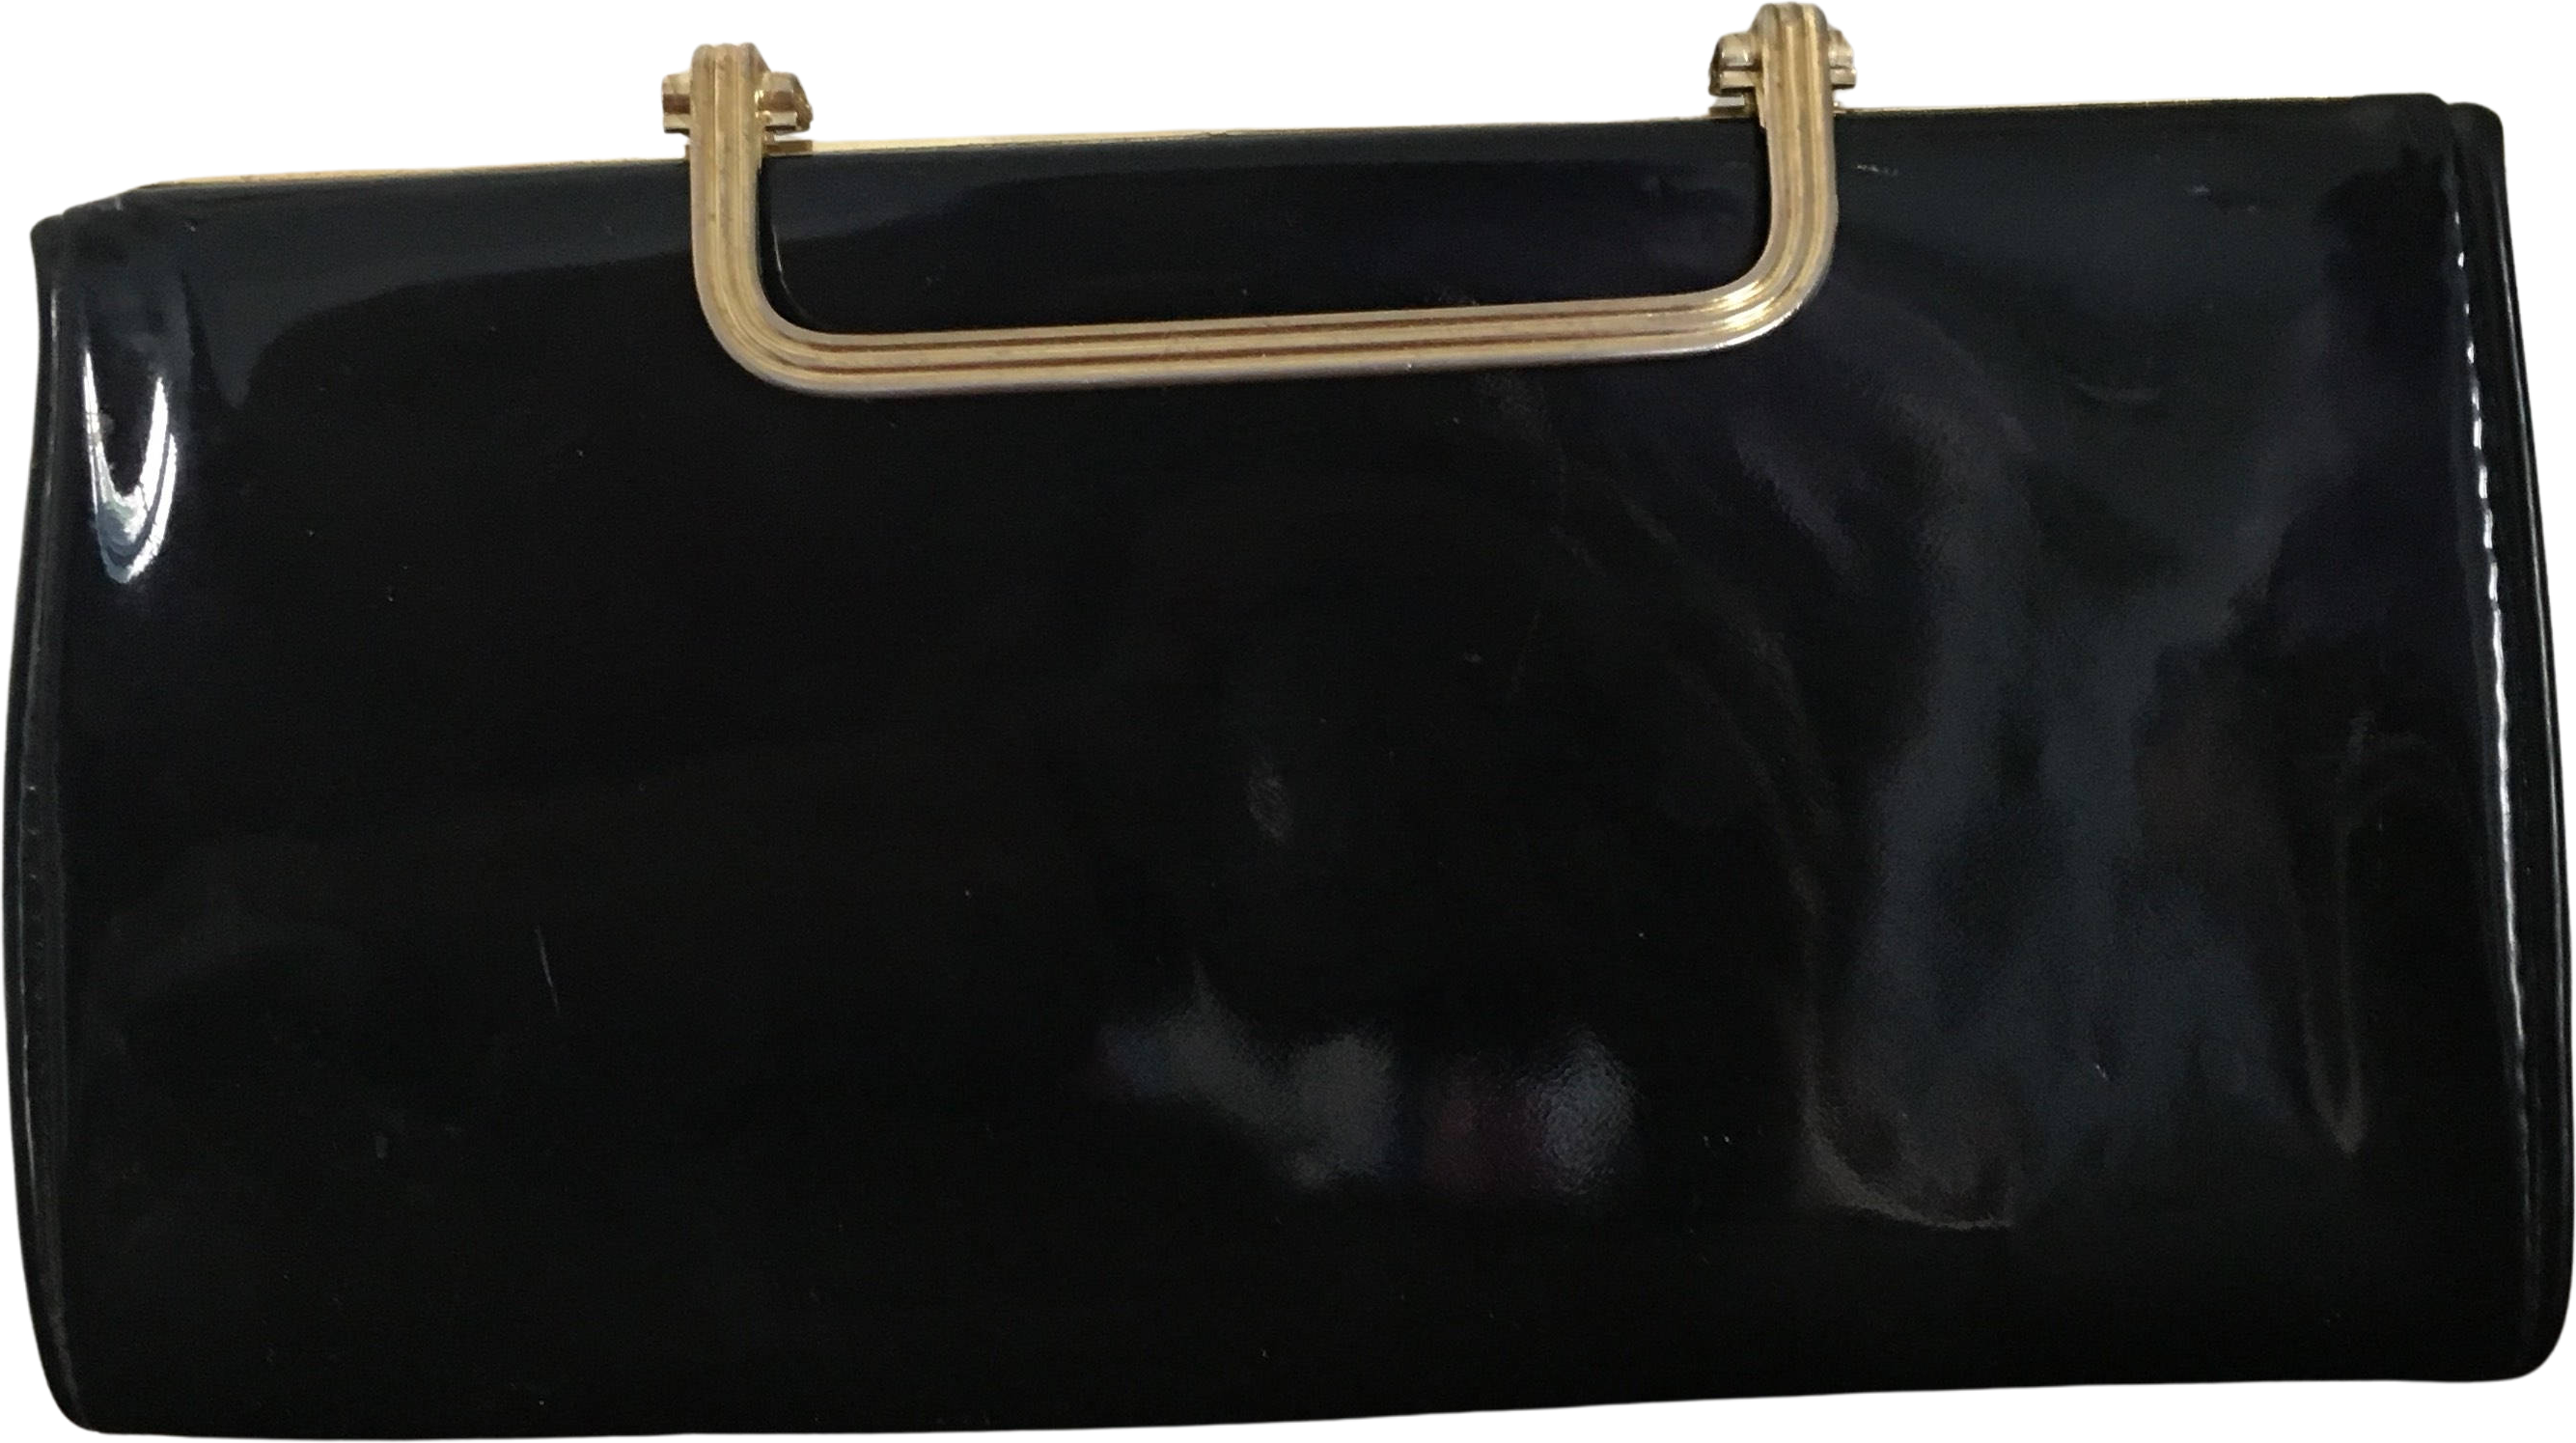 Brighton Black Patent Leather Clutch Purse with Embossed Silver | eBay